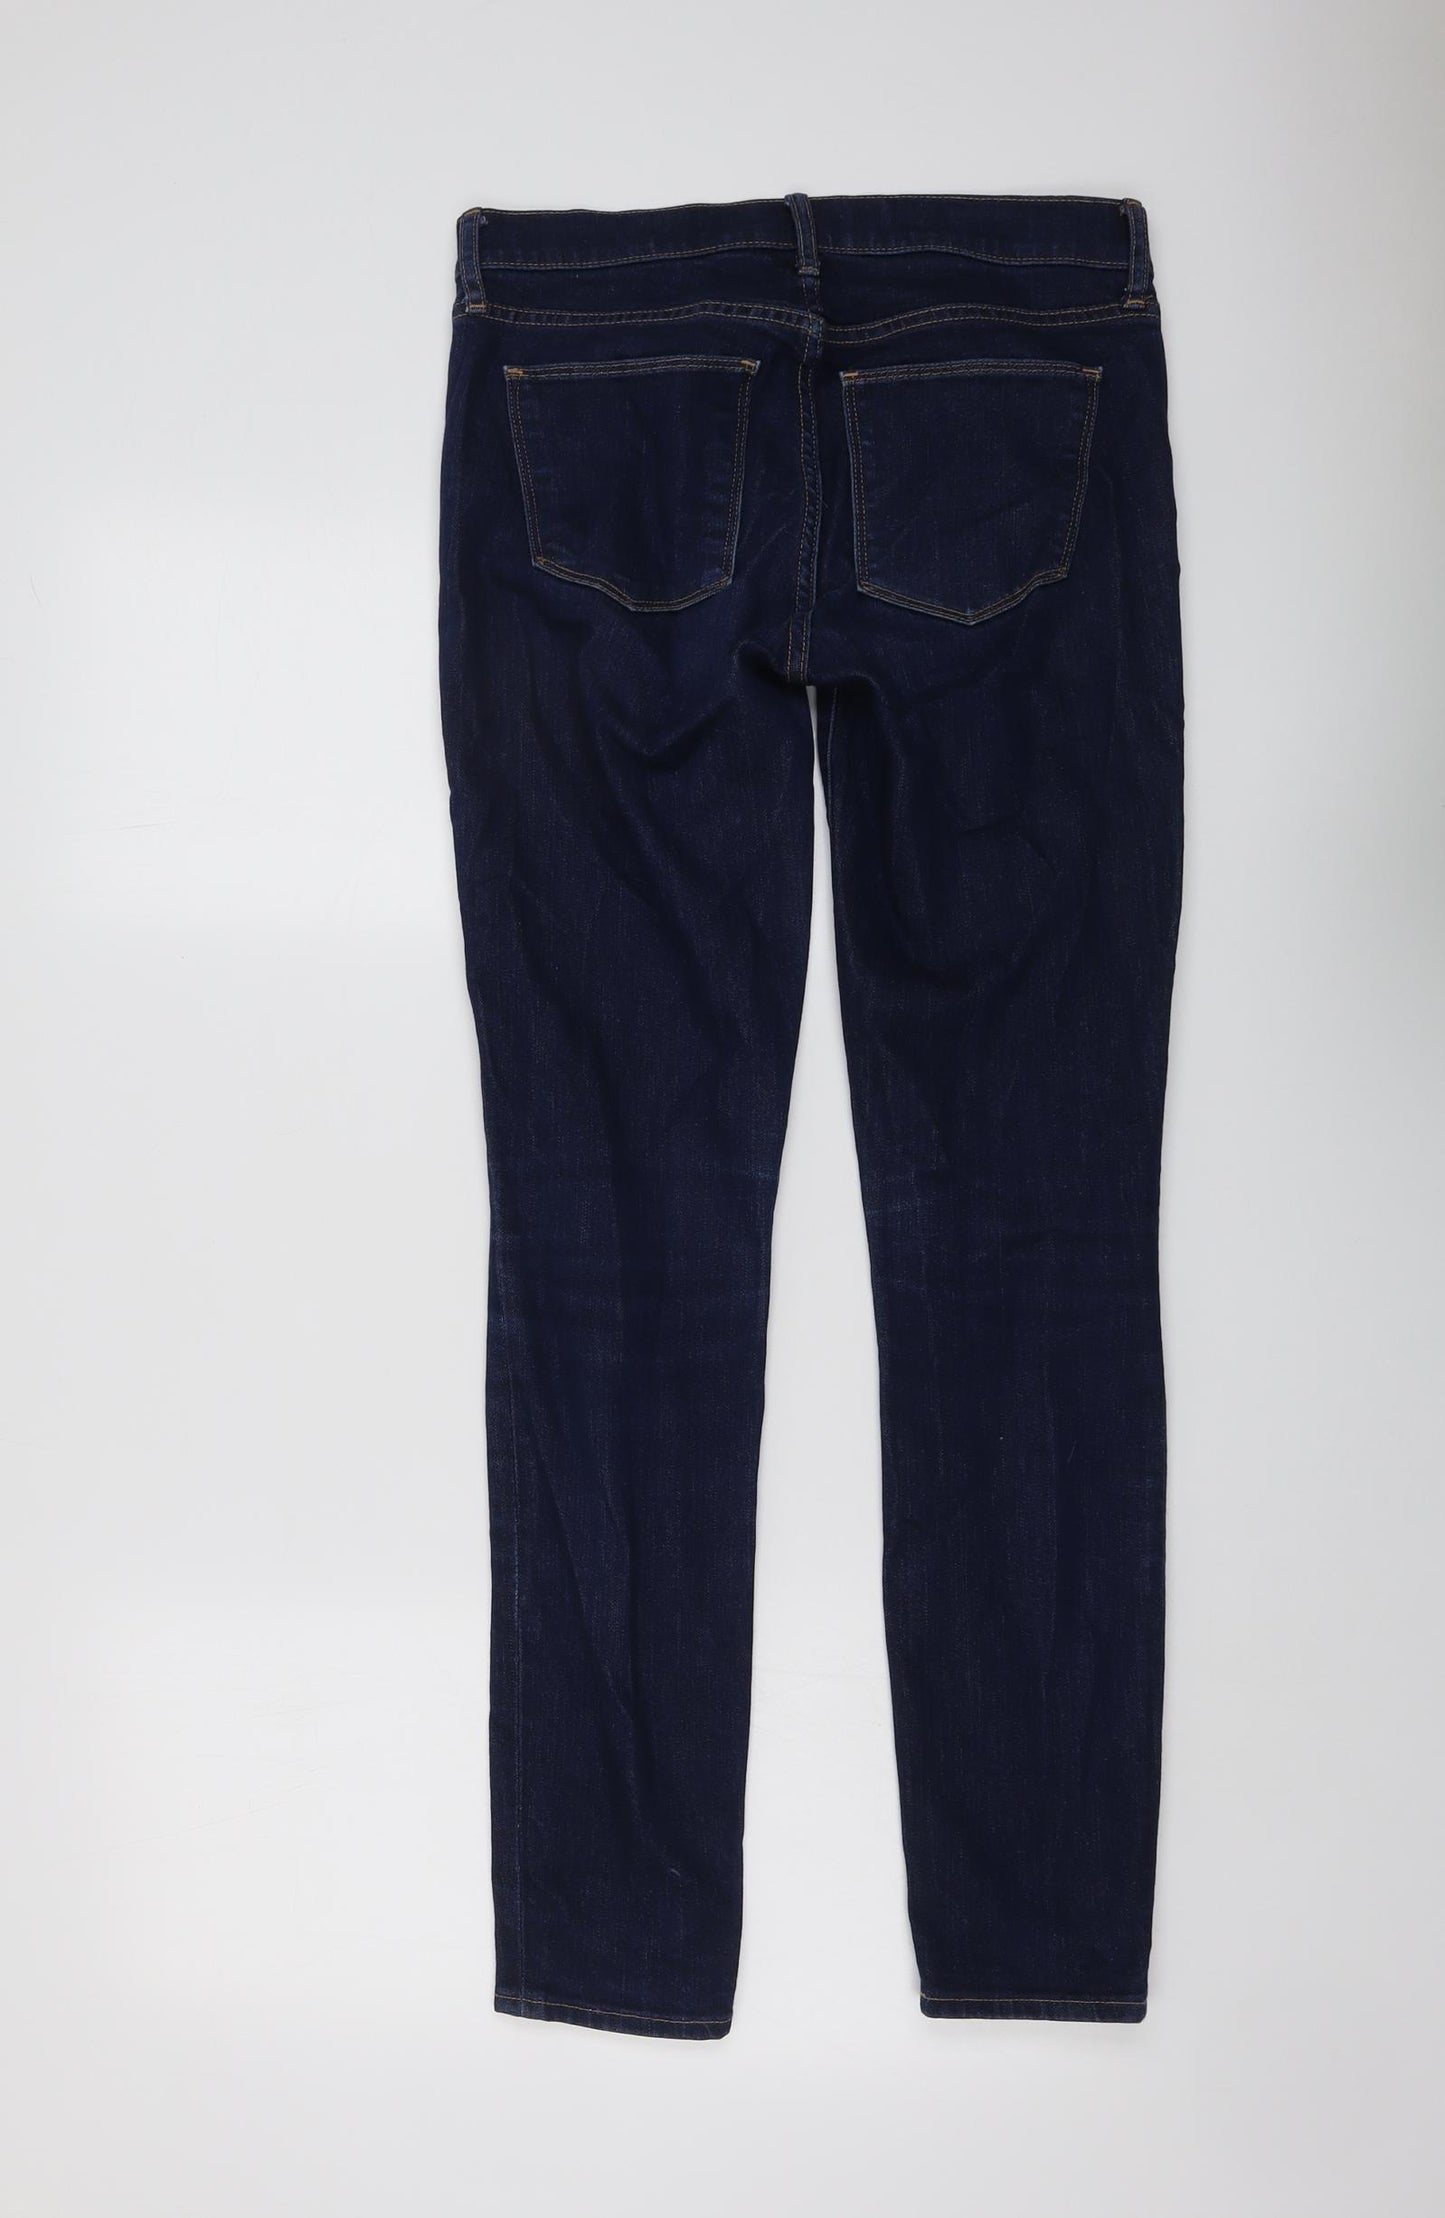 Gap Womens Blue Cotton Skinny Jeans Size 27 in L31 in Regular Button